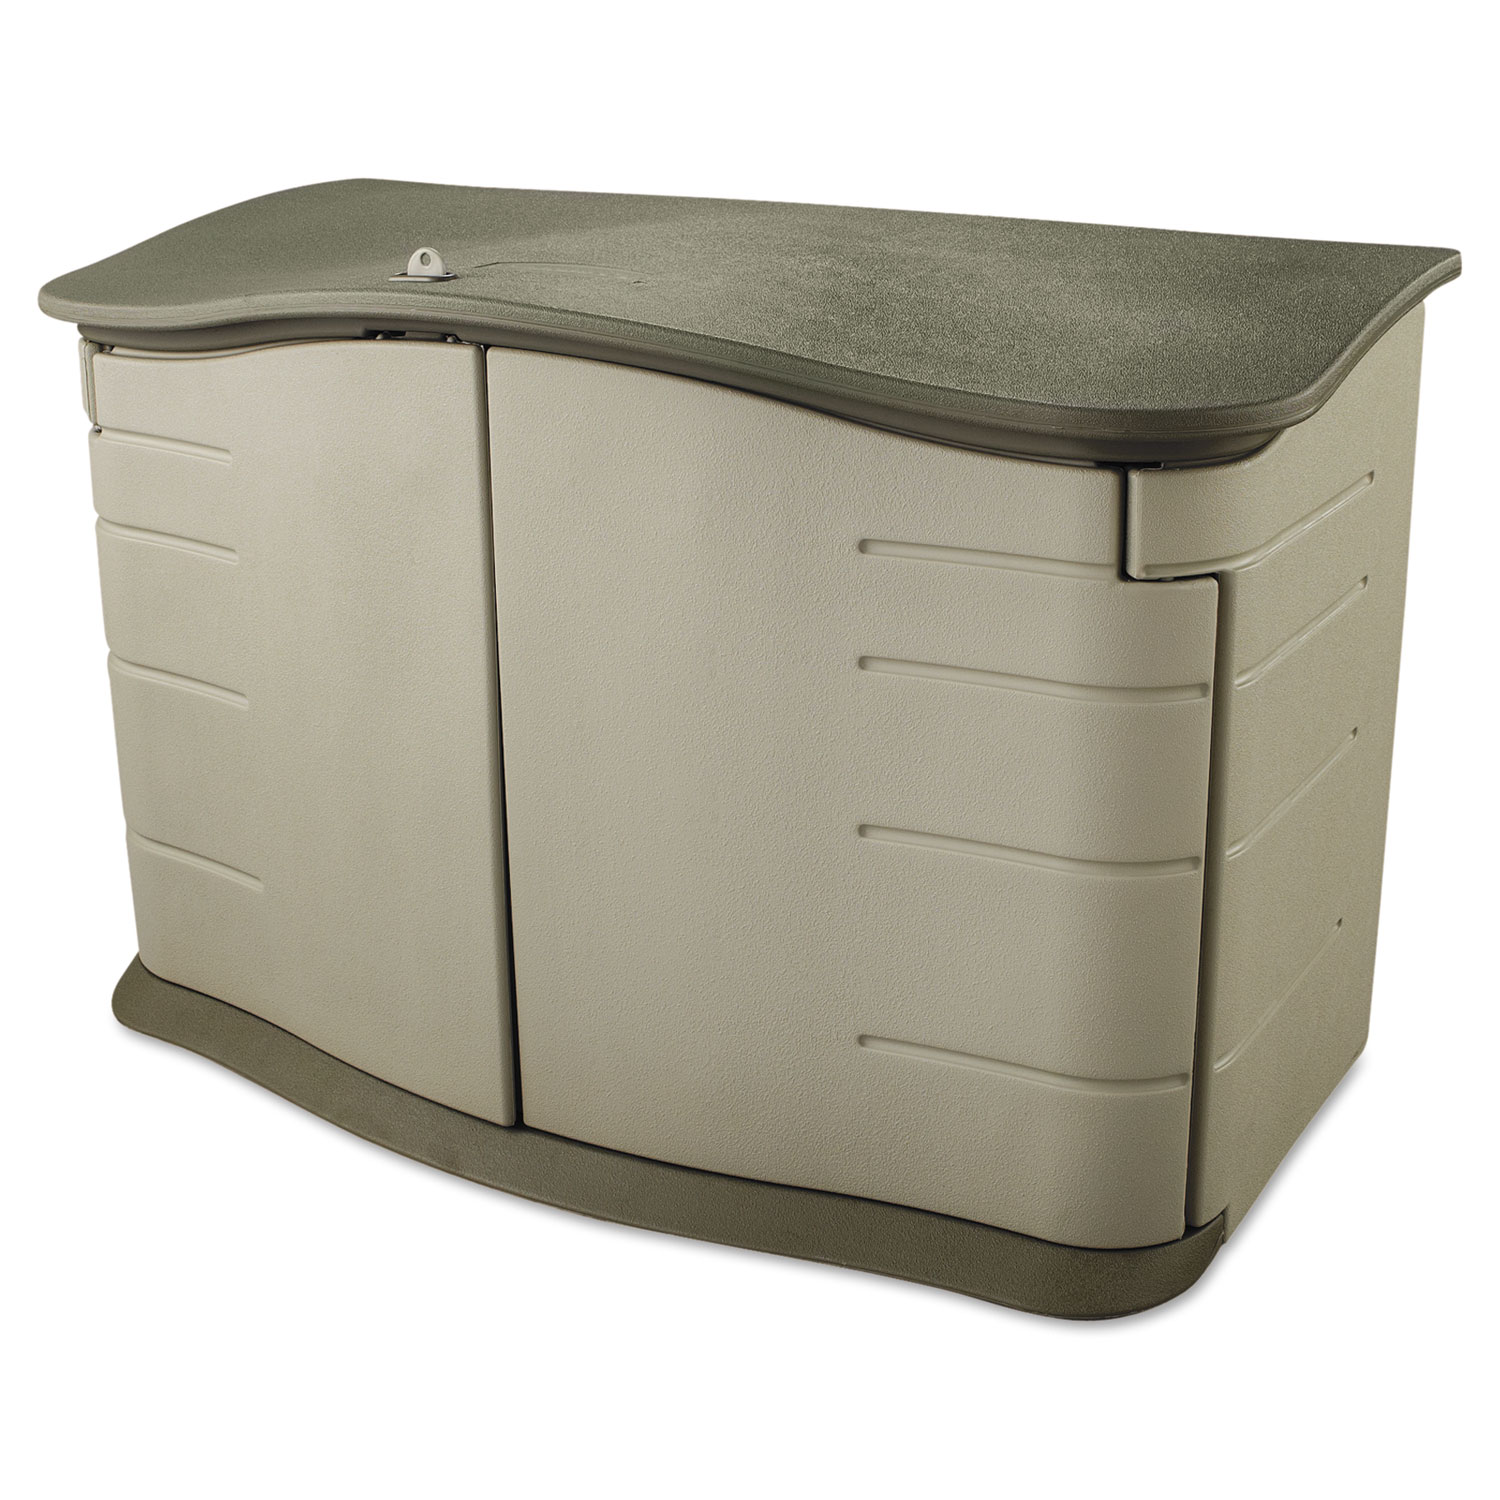 Horizontal Outdoor Storage Shed, 55 x 28 x 36, 20 cu. ft., Olive Green/Sandstone